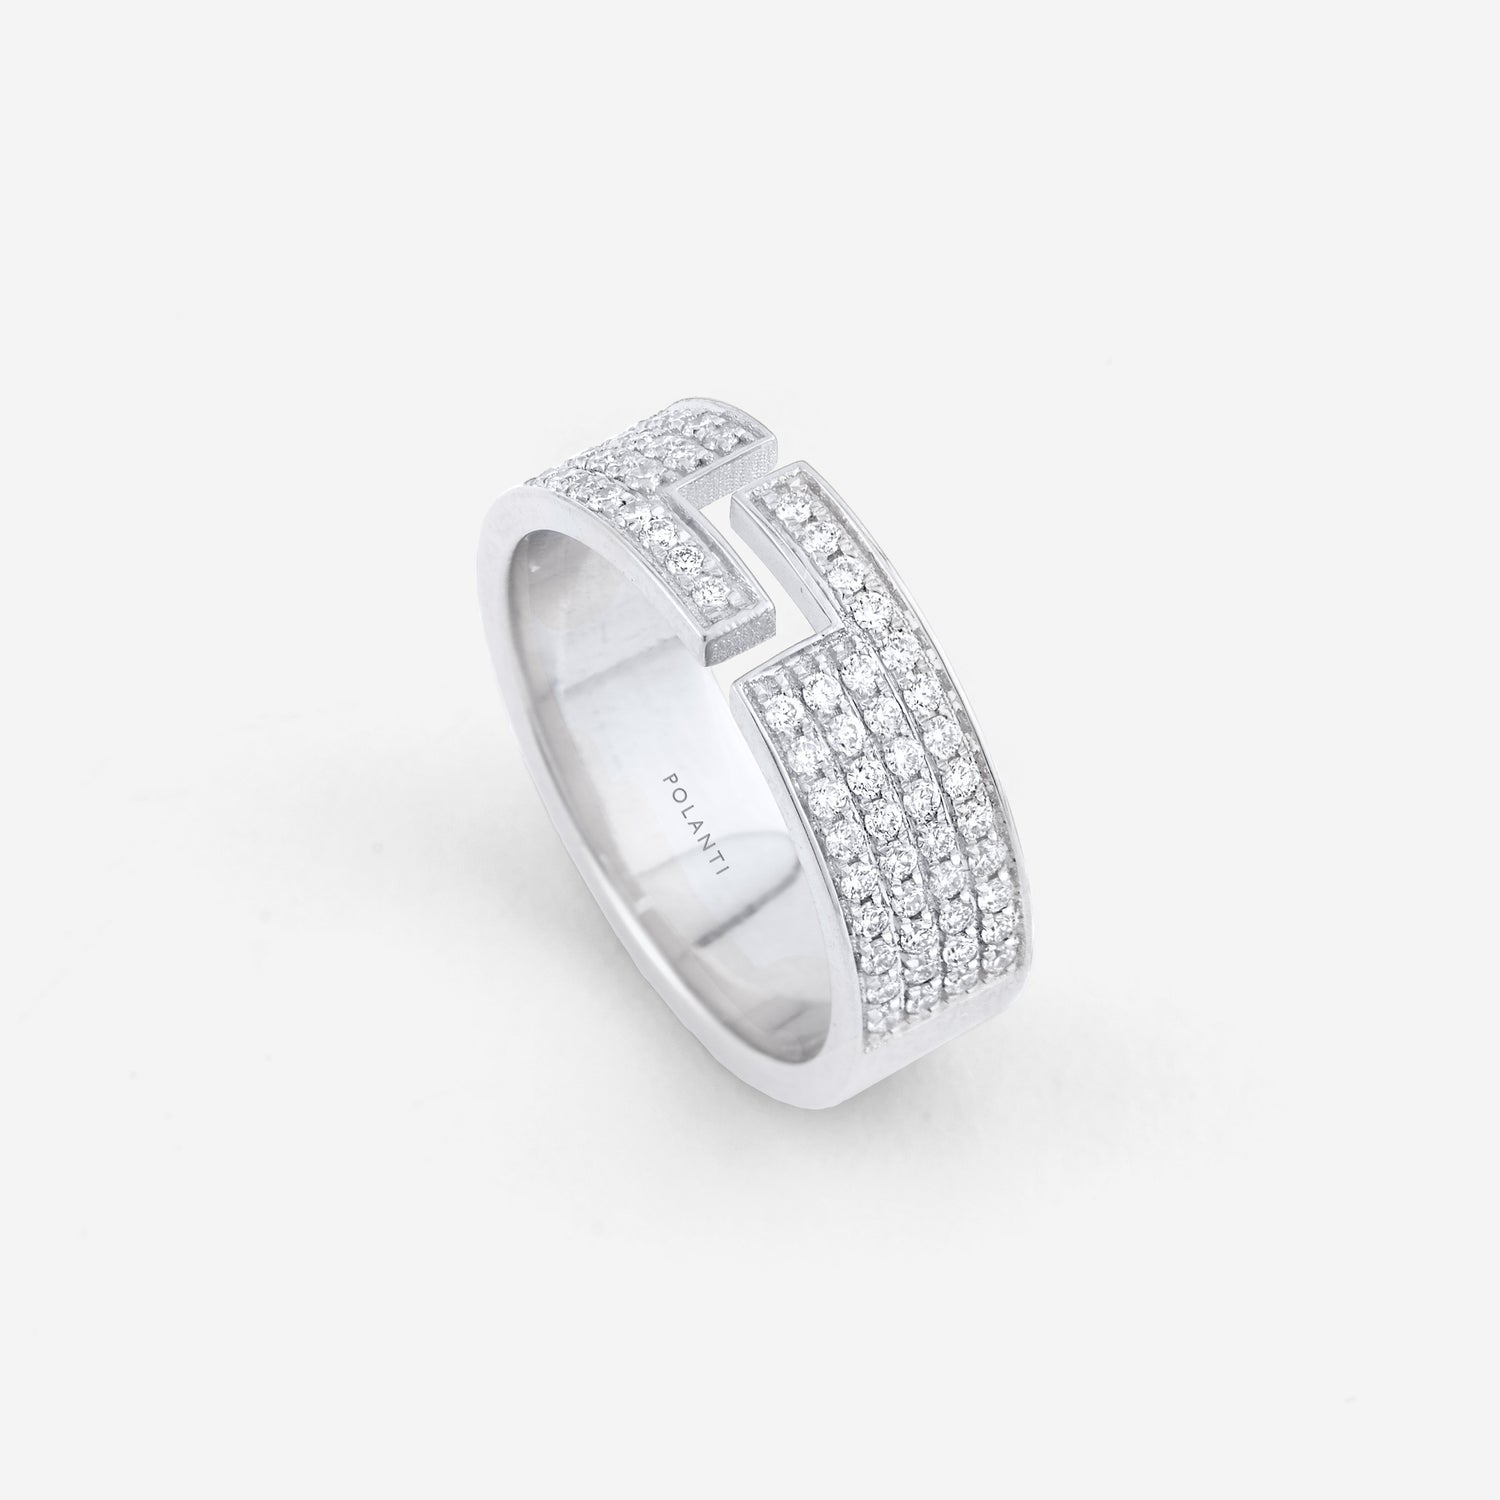 18KT White Gold Signature Ring with Diamonds 7mm